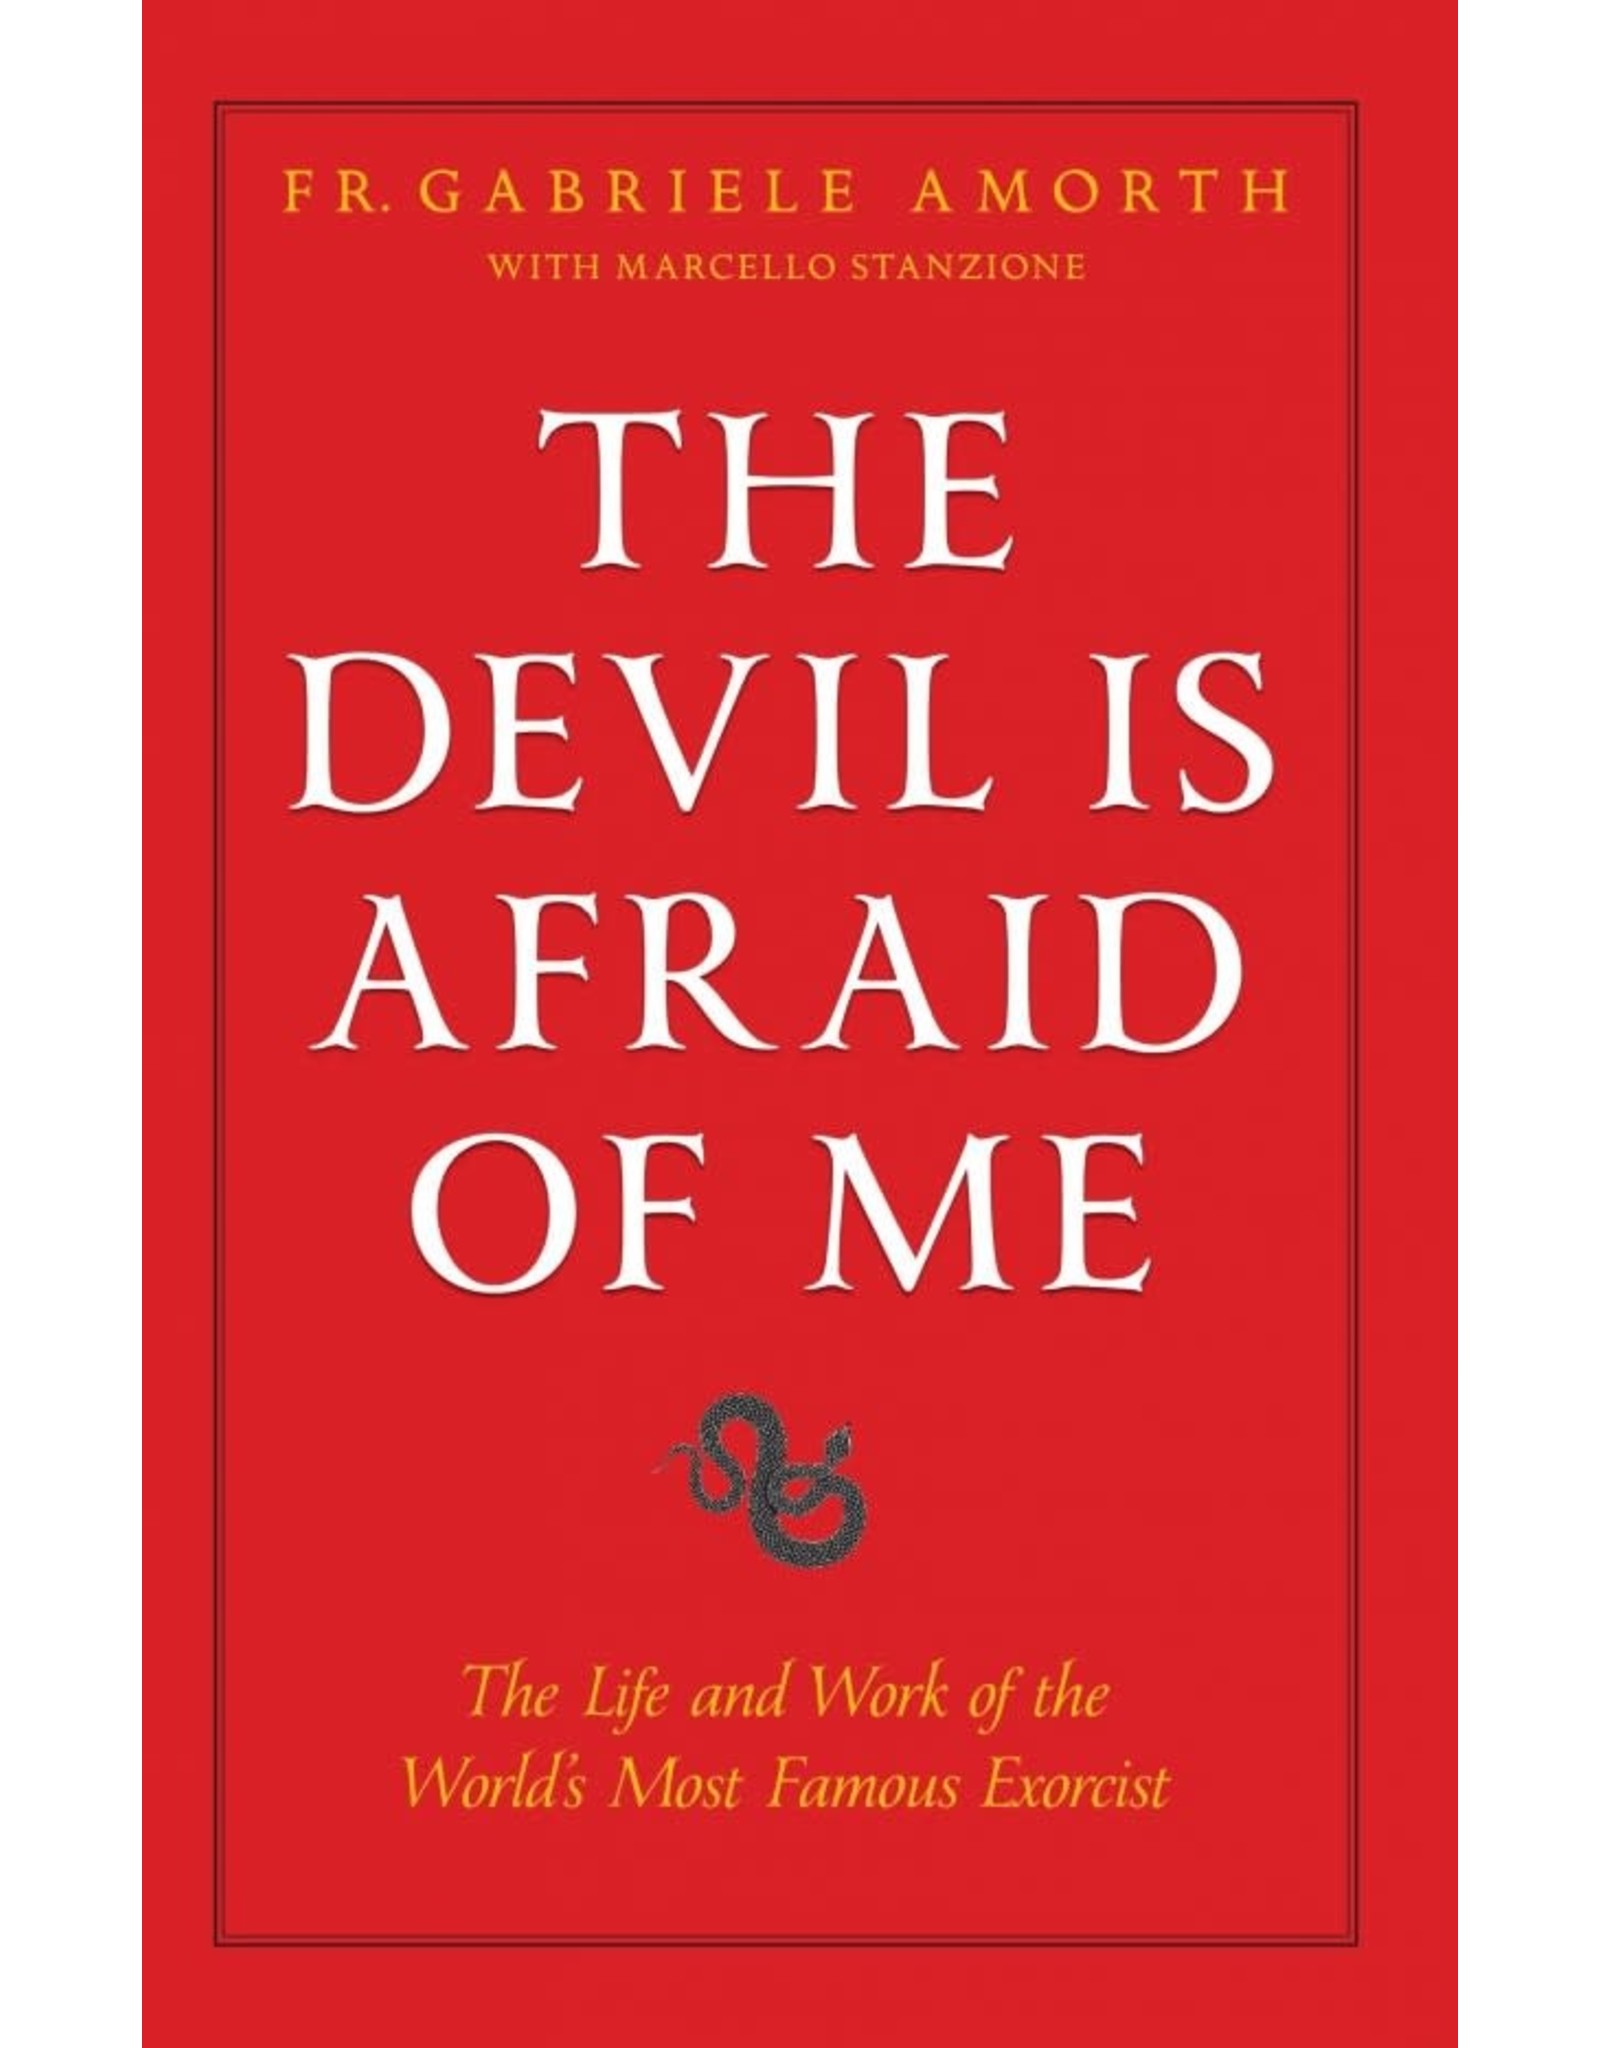 The Devil is Afraid of Me by Fr. Gabriele Amorth (Paperback)